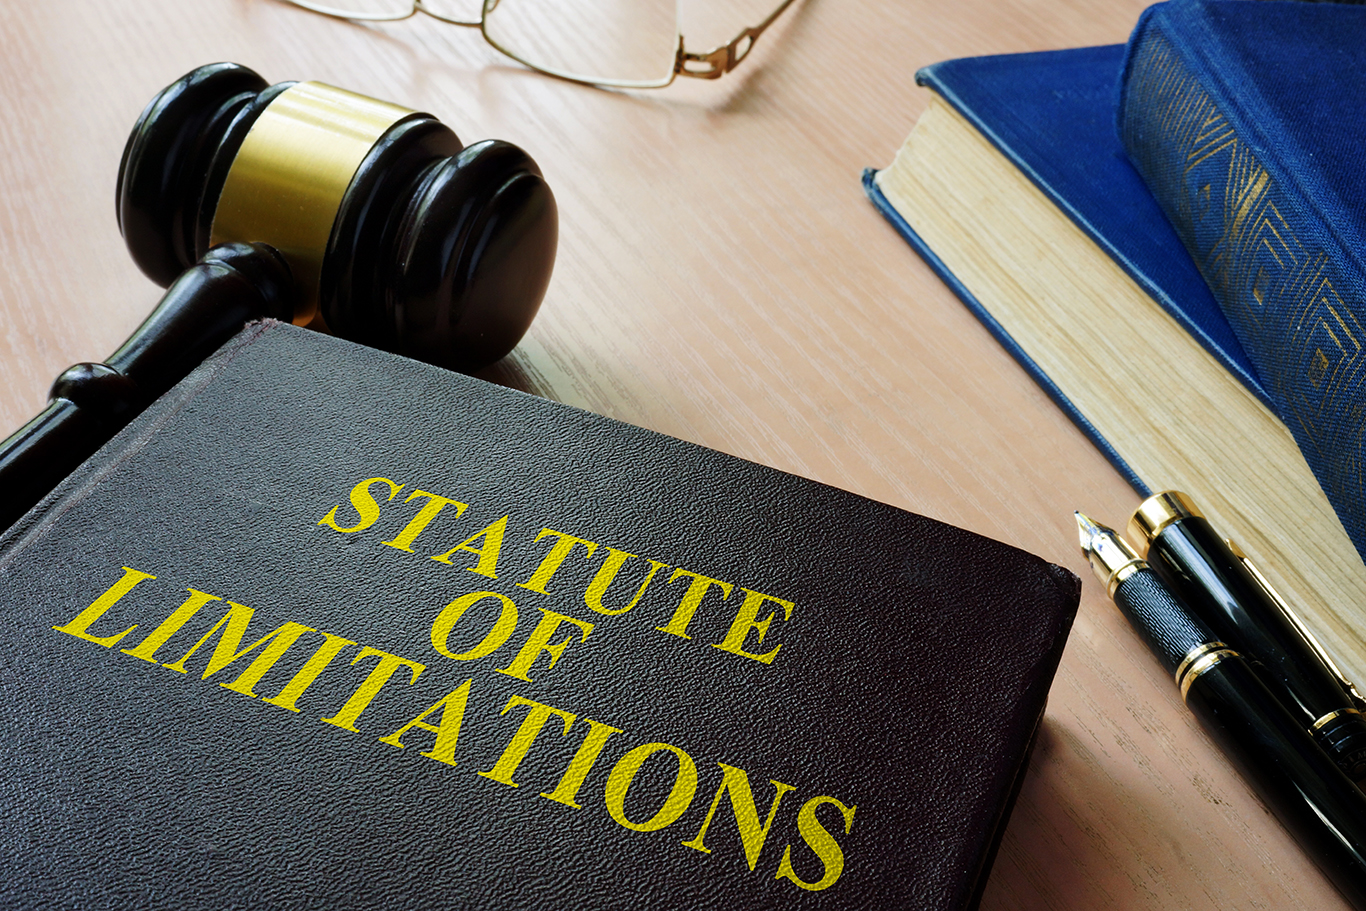 Statutes of limitation and the discovery rule